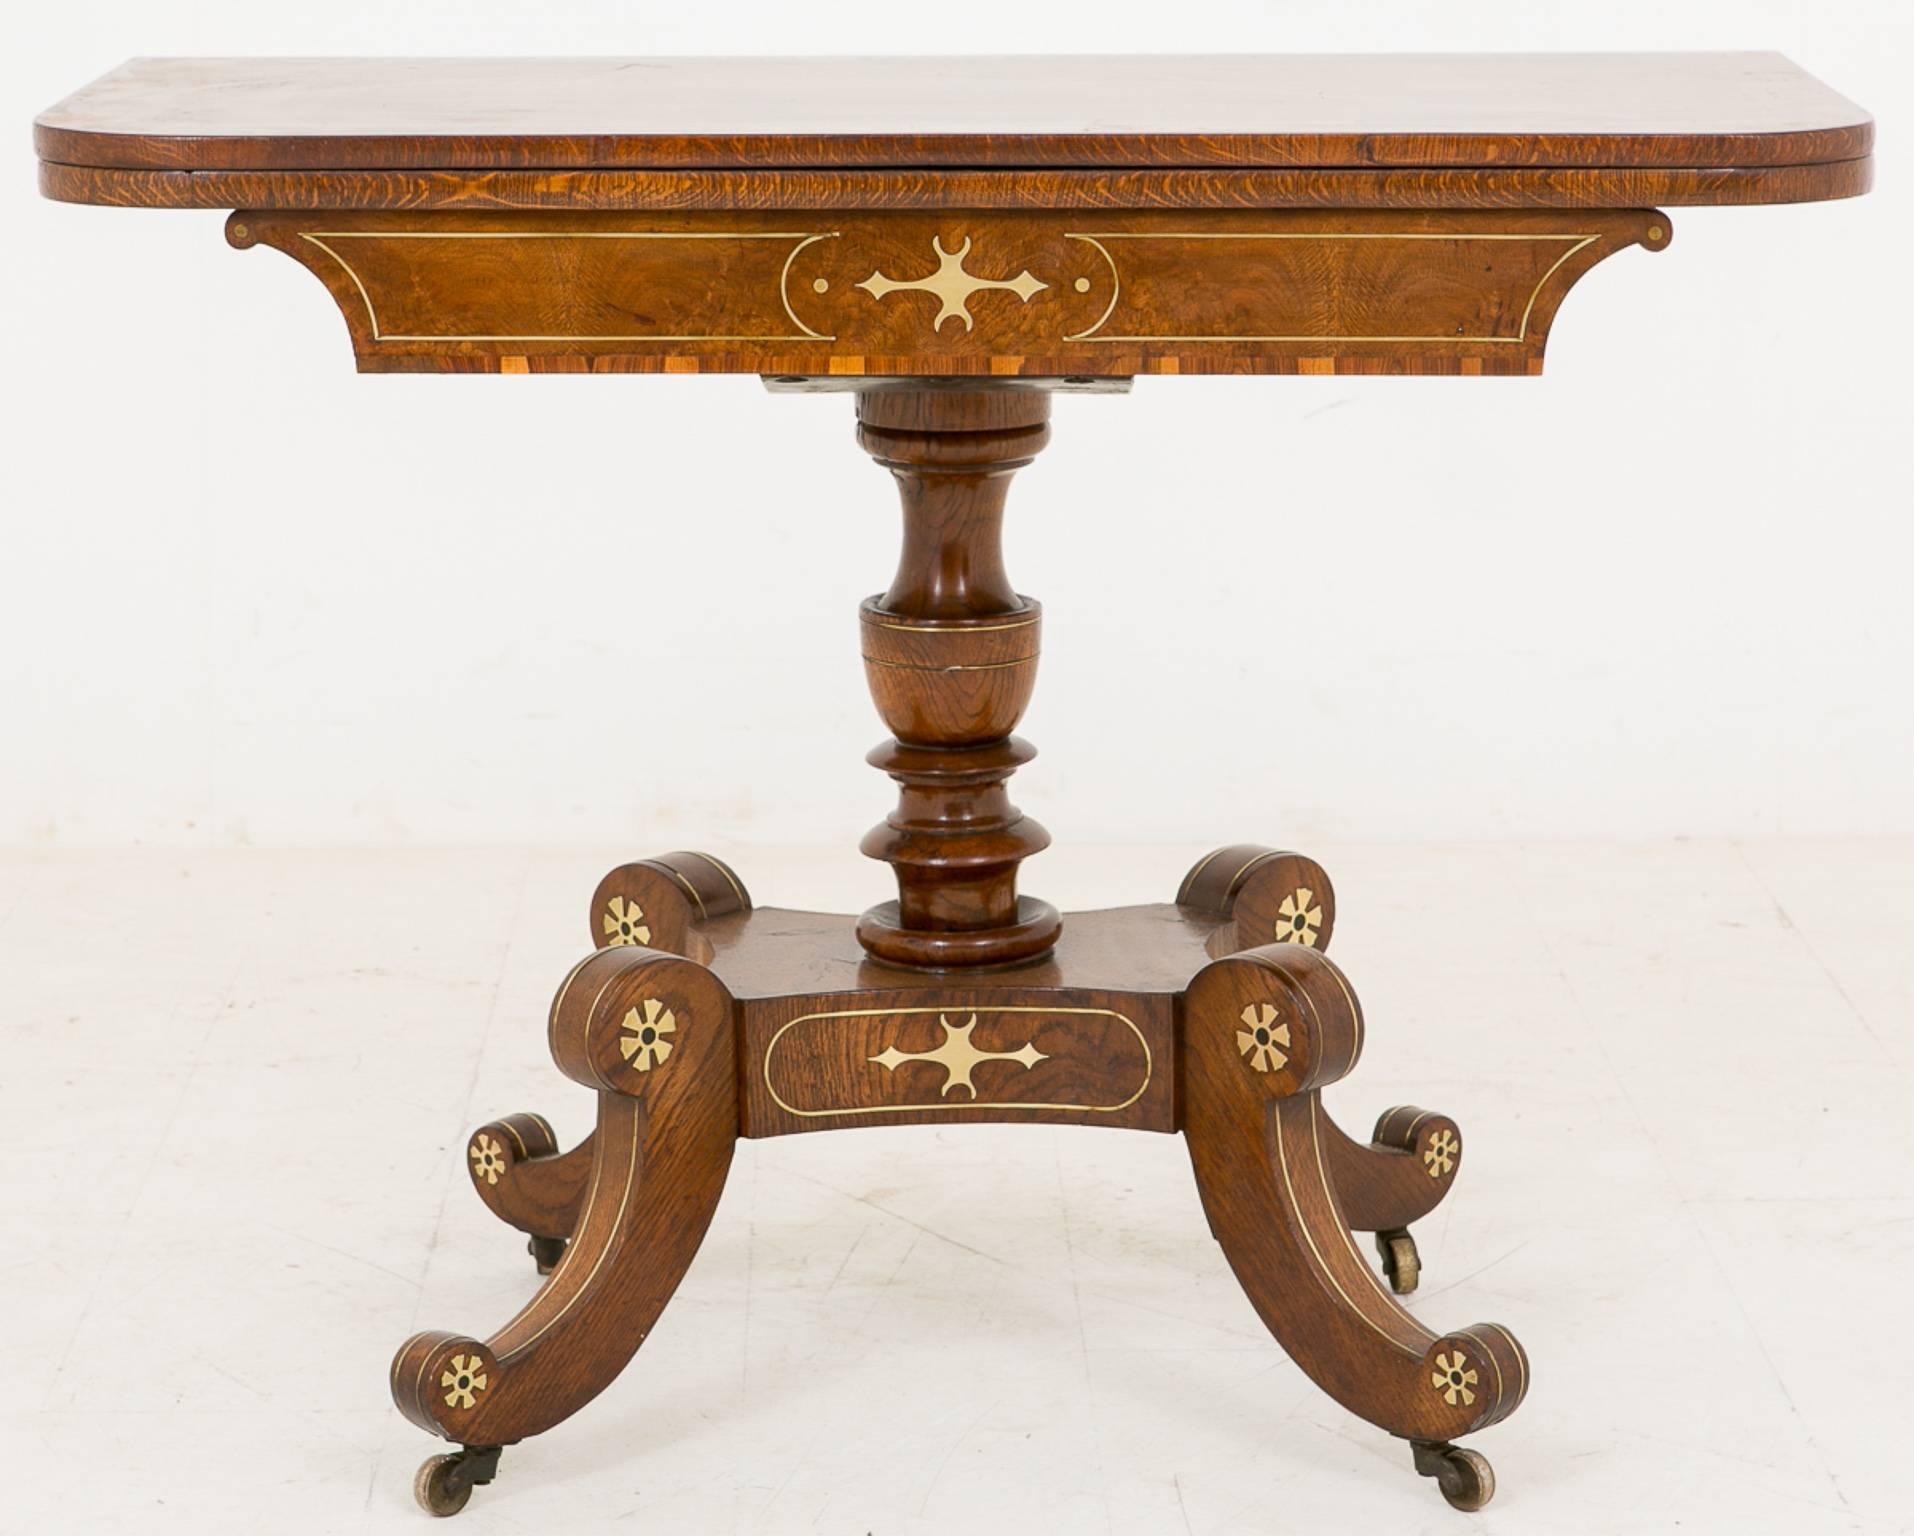 Stunning Regency hand cut brass inlaid pollard oak tea table.
Standing on brass castors with swept legs and urn shaped turned column. Featuring a fold over swivel top with rosewood crossbanding.

Size open:
36